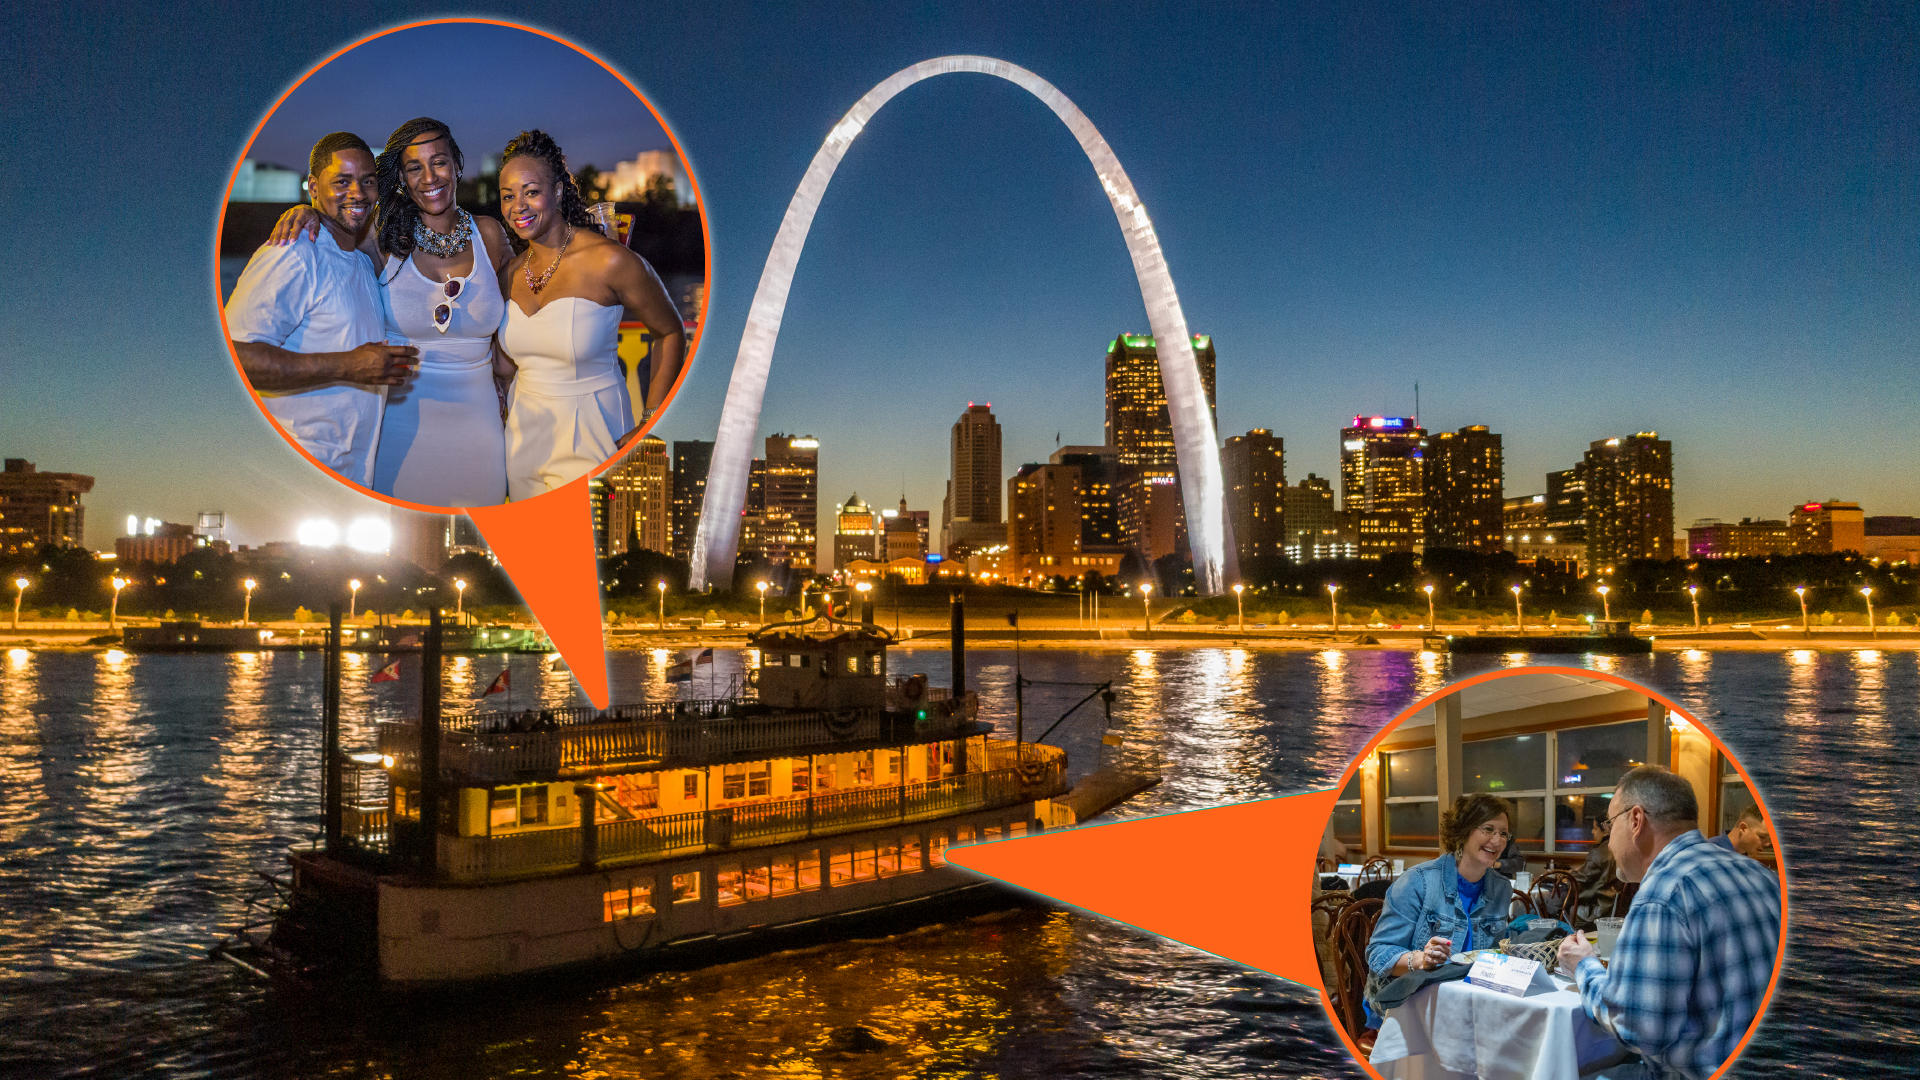 Aerial photo of a riverboat in front of the Gateway Arch during sunset, with multiple smaller images of people enjoying a dinner cruise on the Tom Sawyer Riverboat